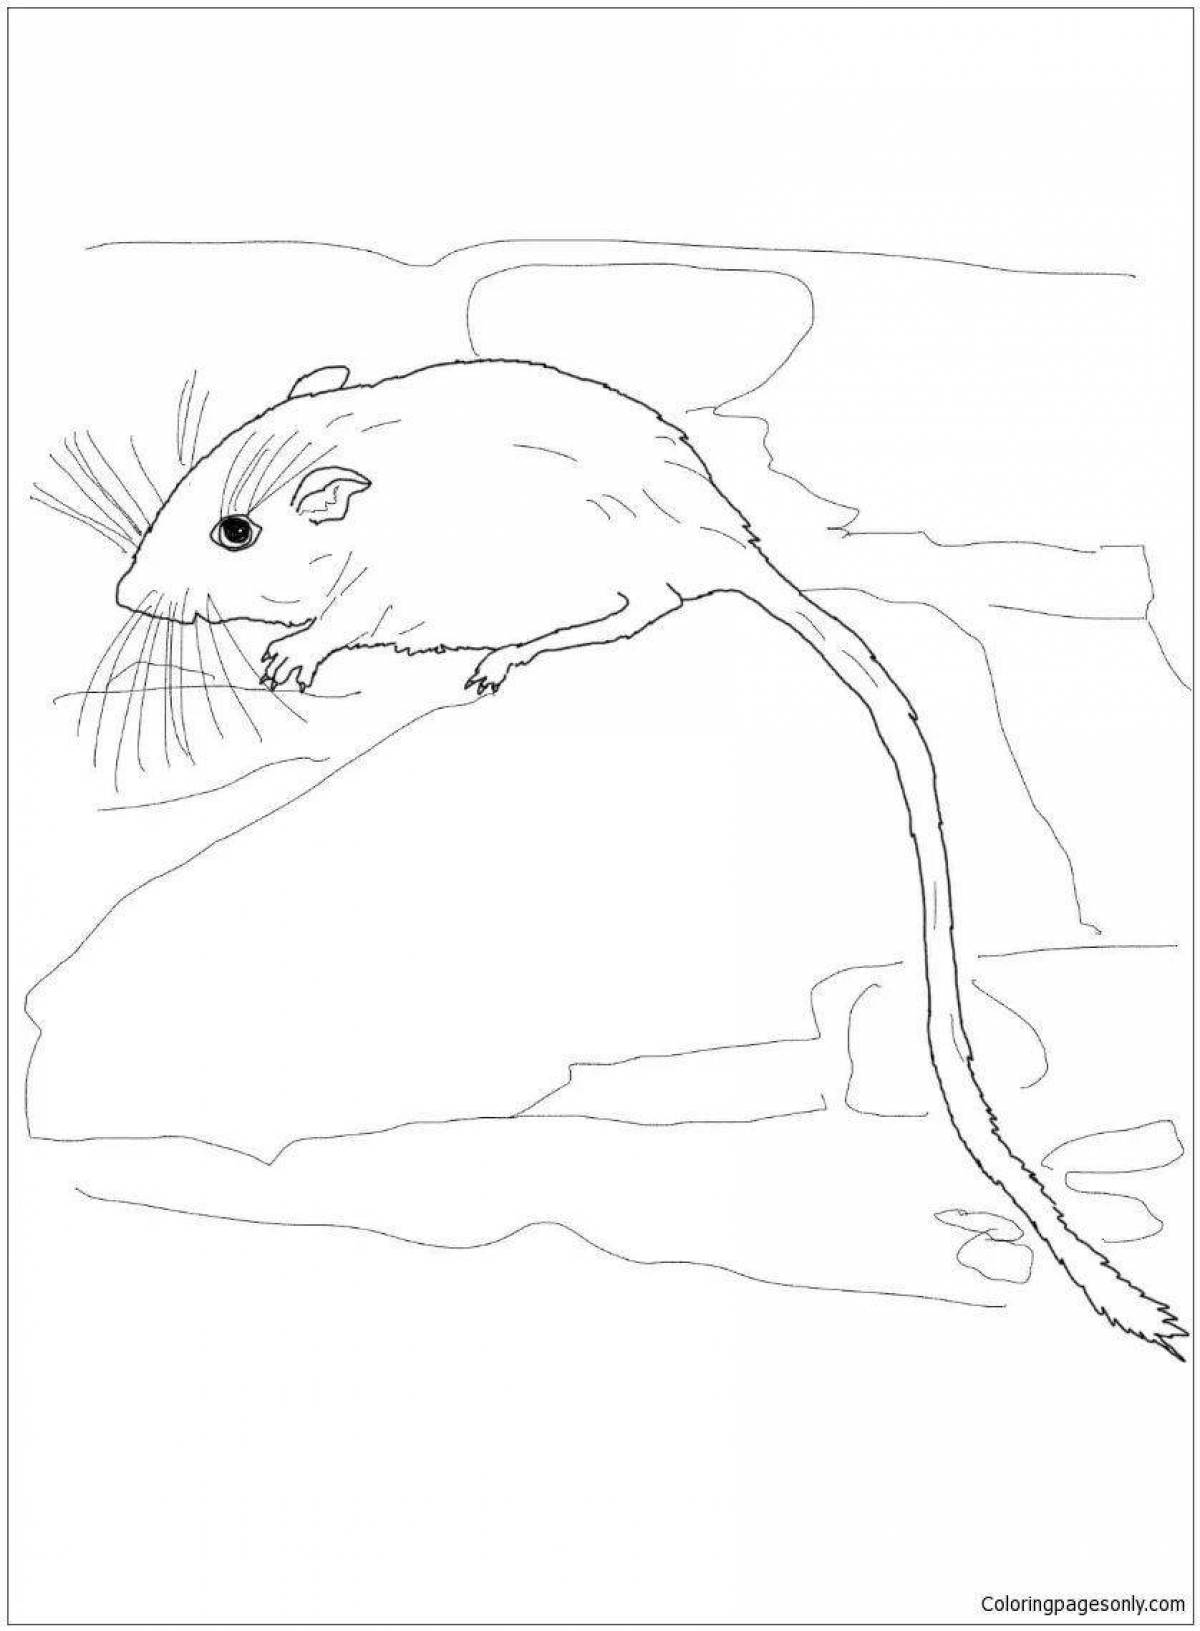 Crop Mouse Charming Coloring Page